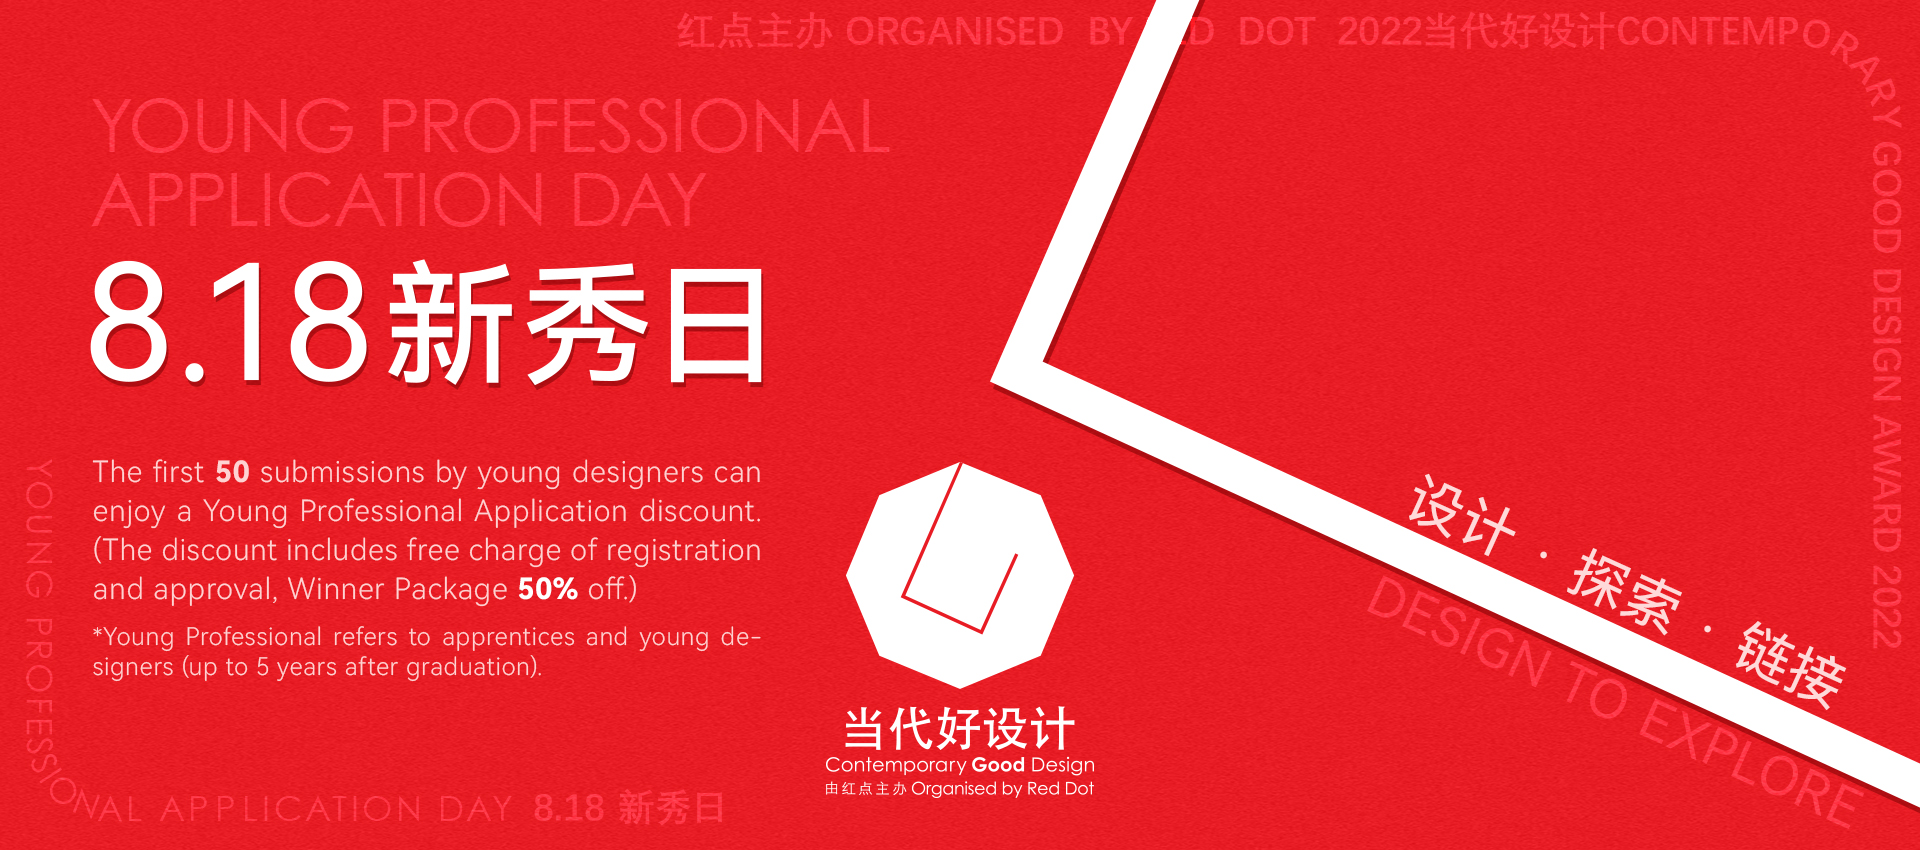 8·18 Young Professionals Application Day | How to stand out as a budding designer? Take your chance!